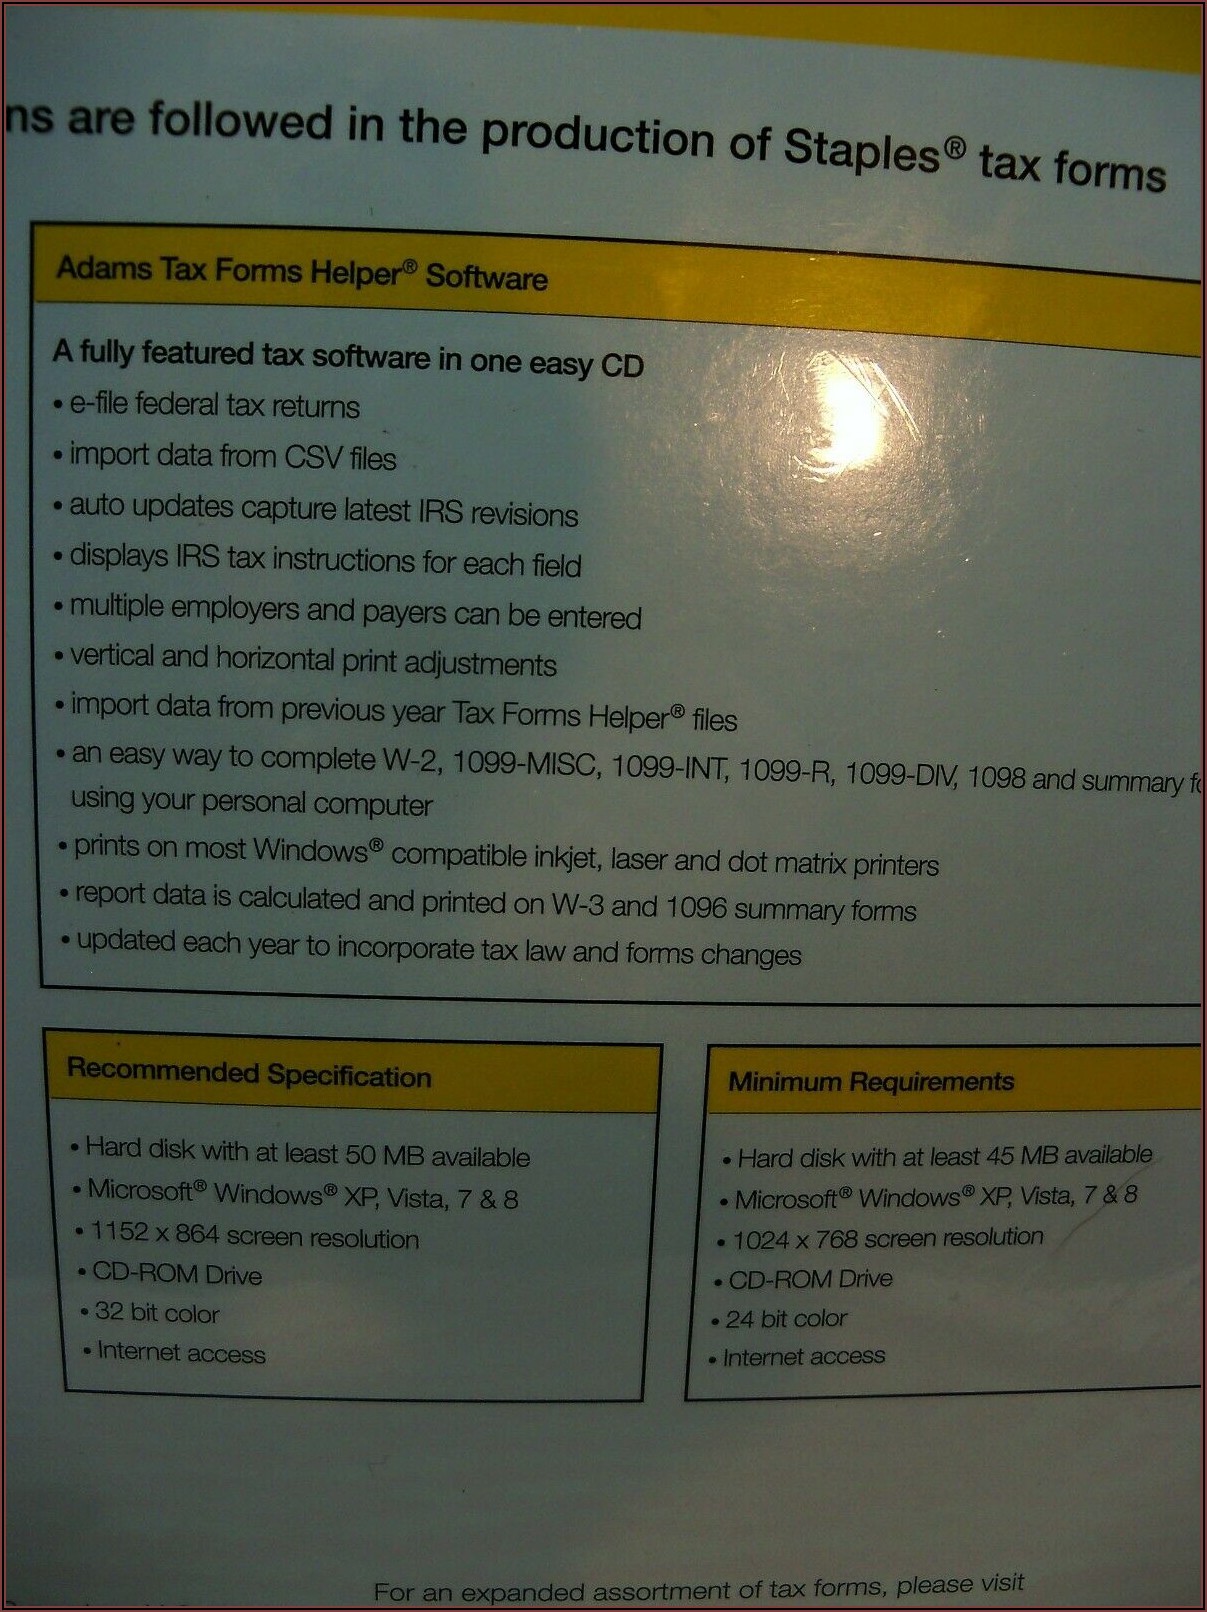 Staples 1099 Misc Tax Forms Software Kit